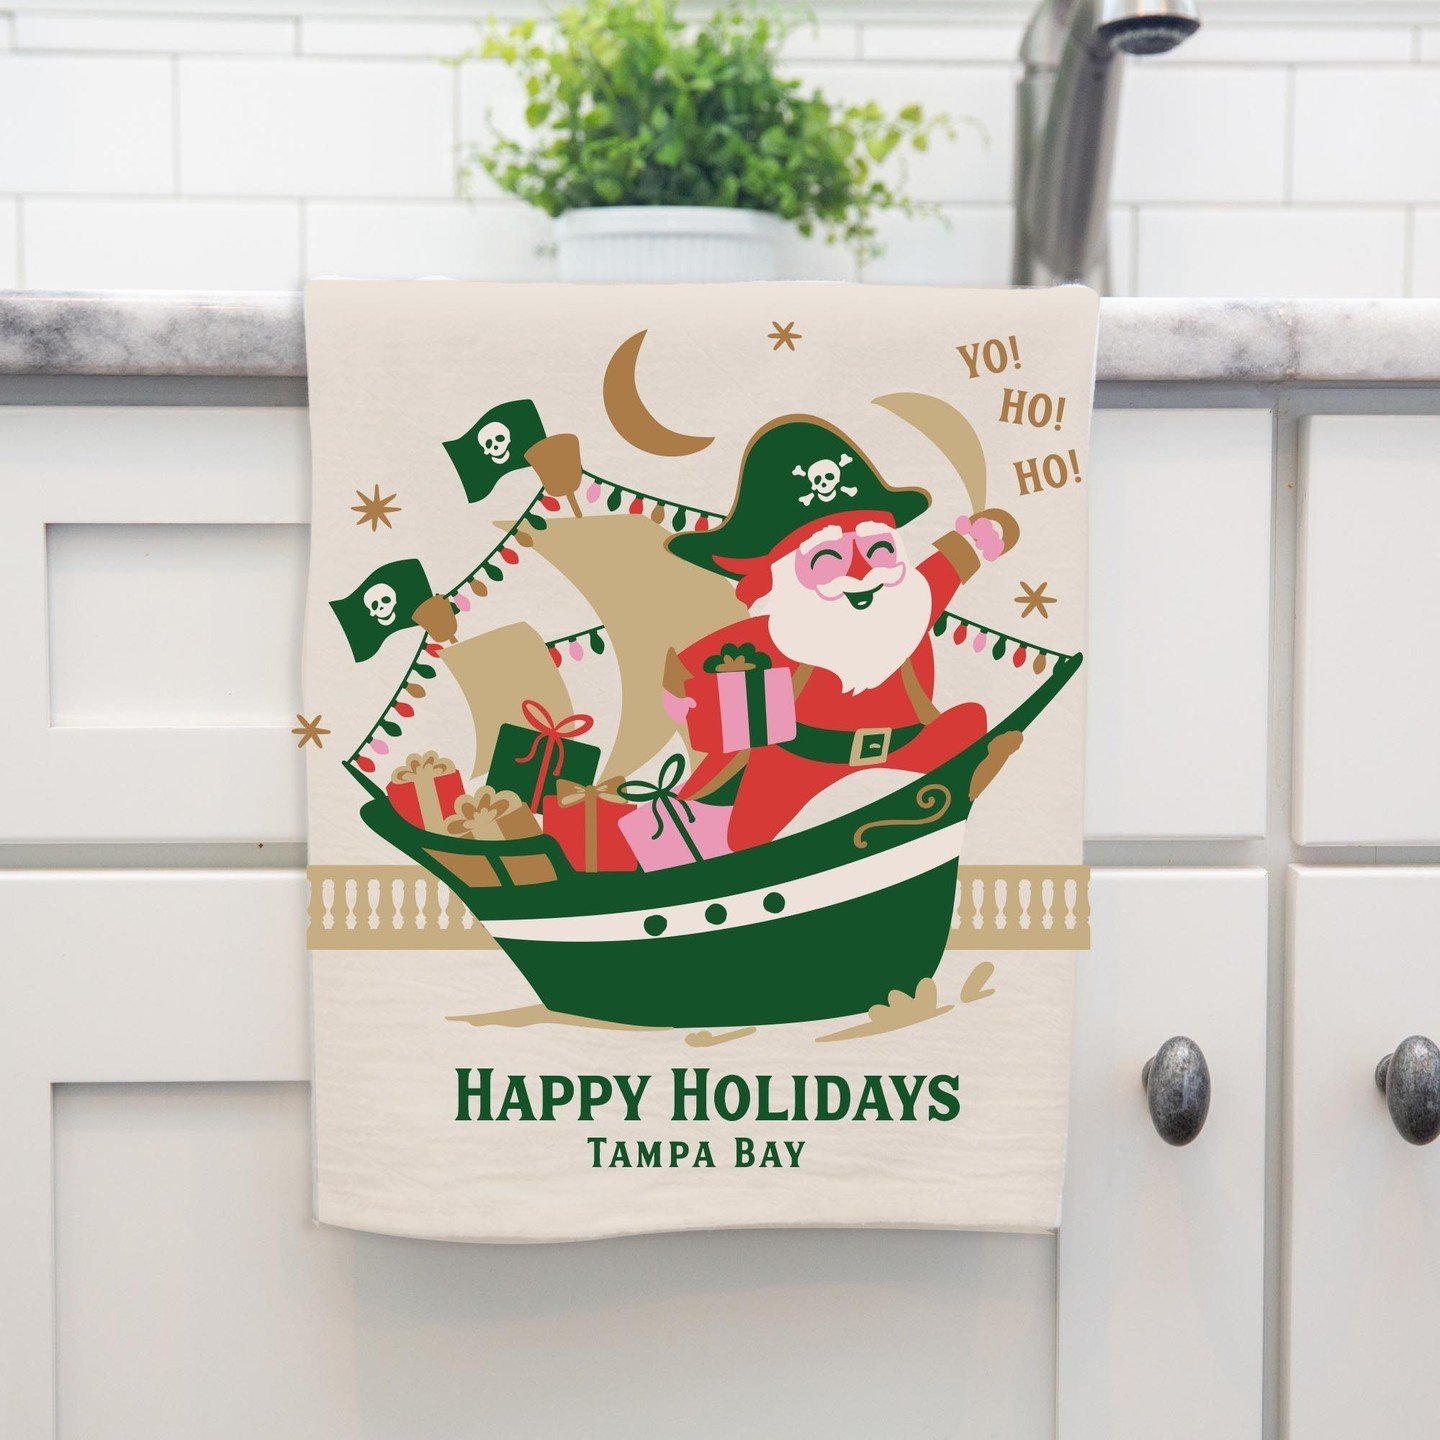 Ahoy there, mateys! 🎅🏴&zwj;☠️ Sailing through the holiday season with the Santa pirate ship tea towel! Gift the spirit of adventure or bring some festive swashbuckling fun to your kitchen this Christmas. ⁠
⁠
#ilovetampa #tampabay #shopsmallsouthtam